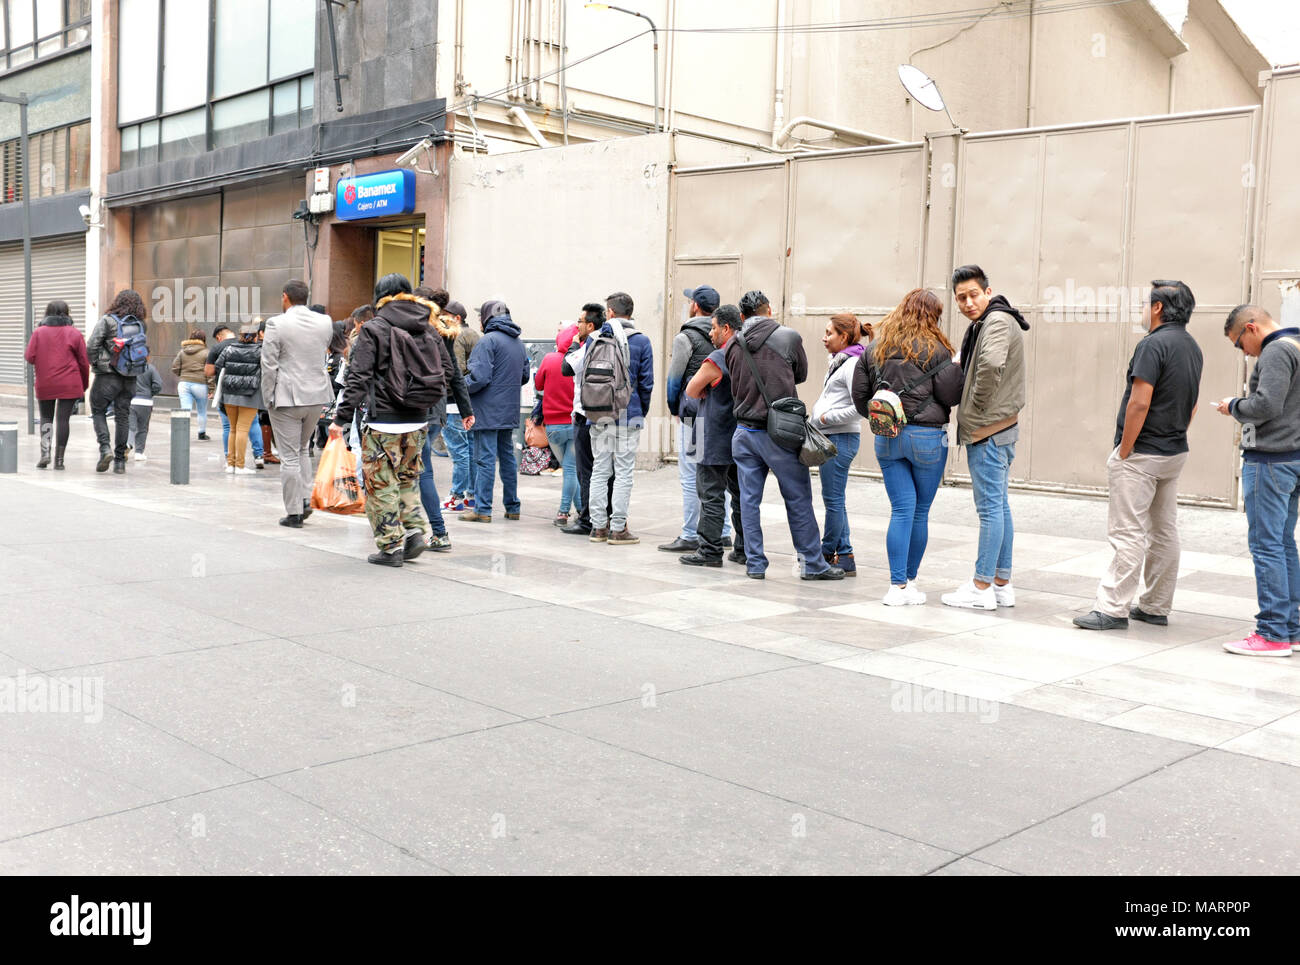 People stand in line waiting to use an ATM bank machine in Mexico City, Mexico on January 30, 2018. Stock Photo